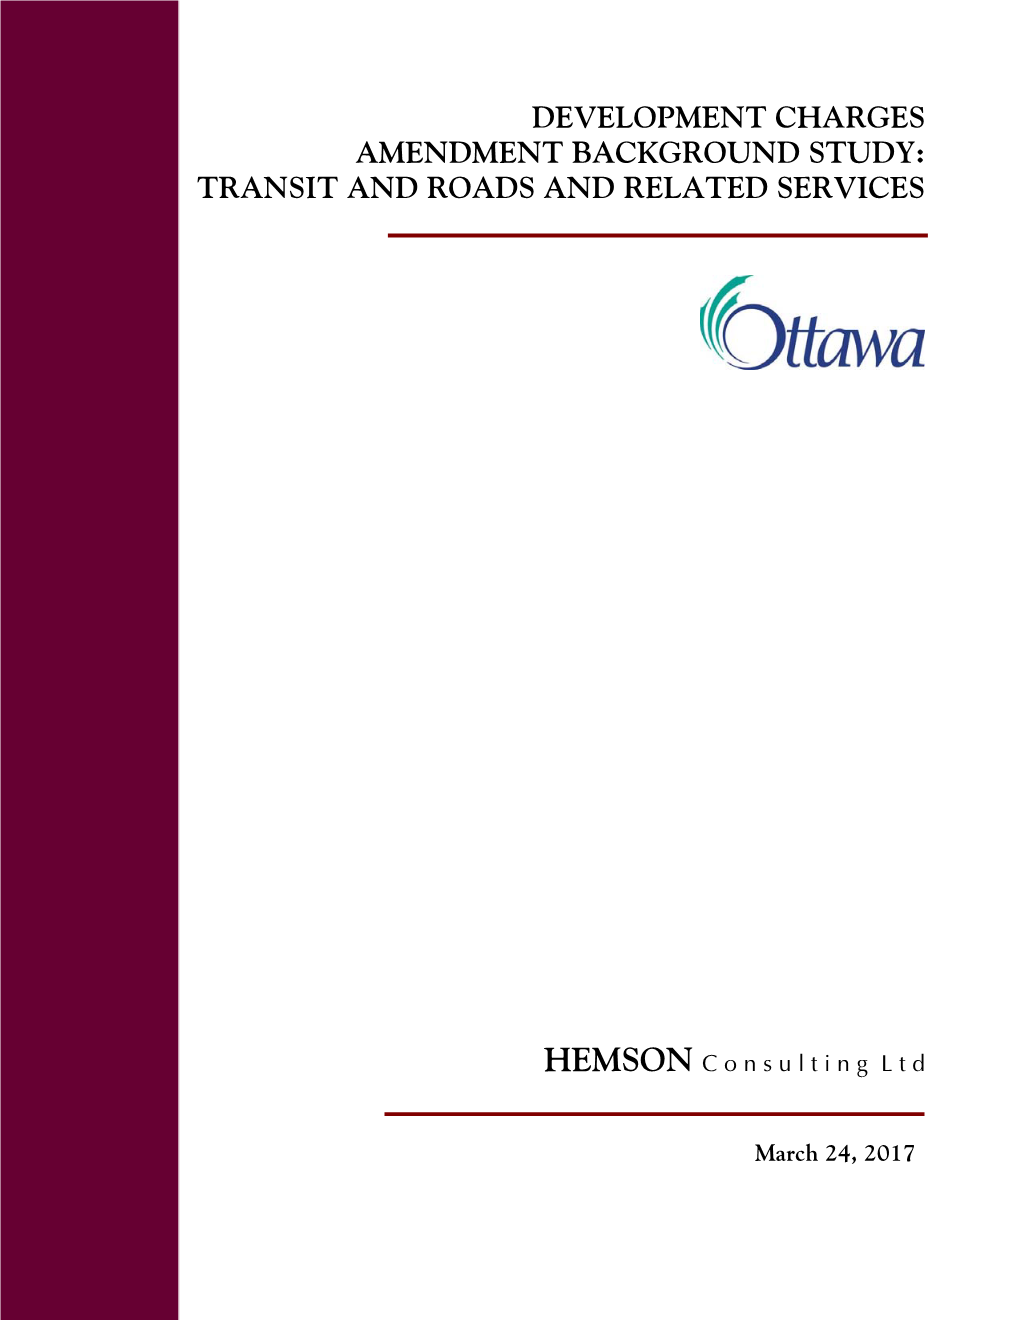 Development Charges Amendment Background Study: Transit and Roads and Related Services